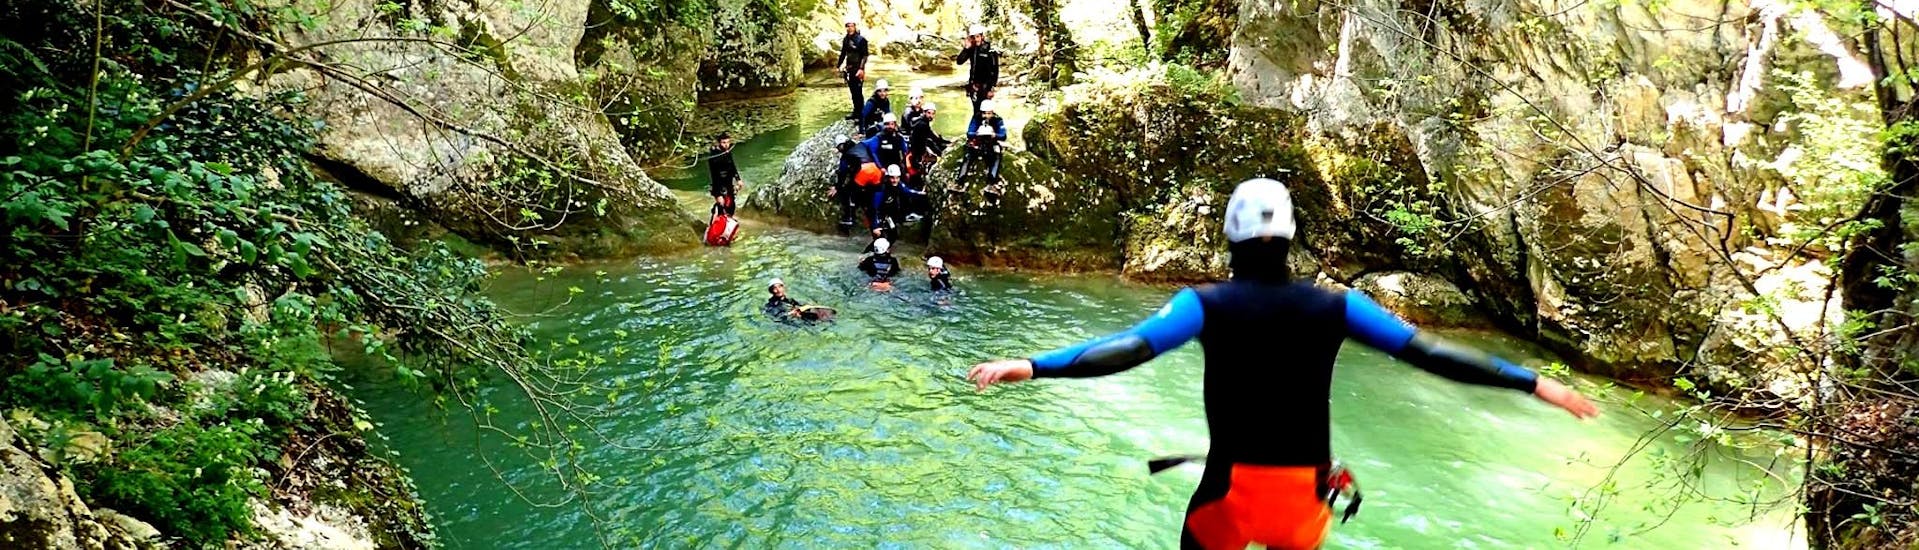 Canyoning classico nell'Aniene a Subiaco.